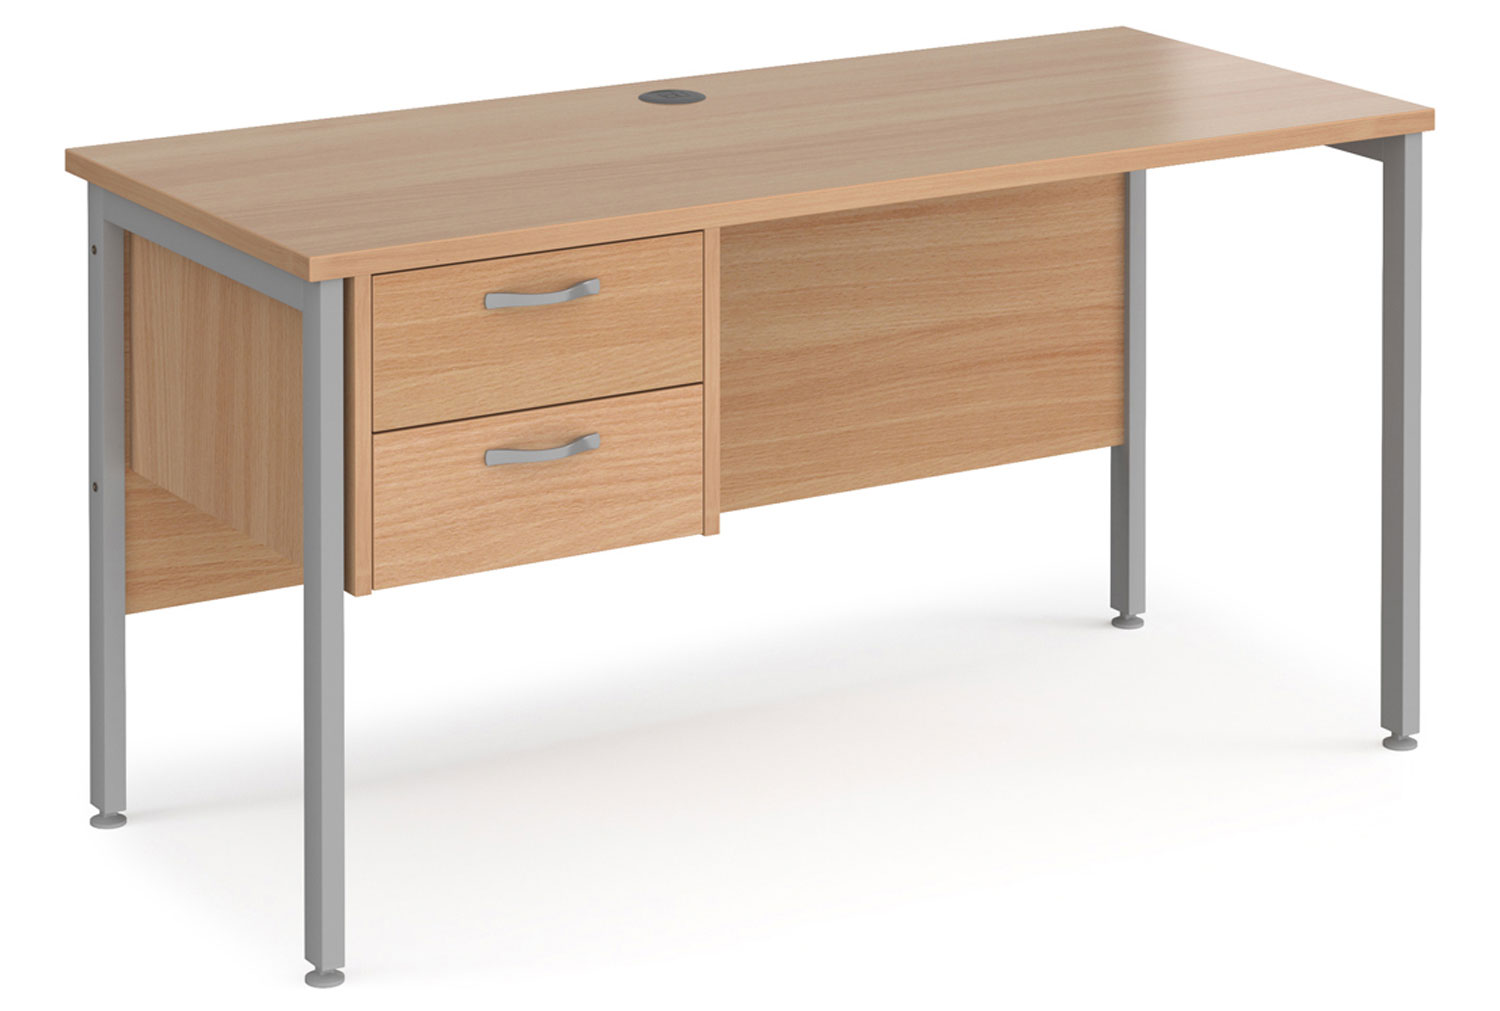 Value Line Deluxe H-Leg Narrow Rectangular Office Desk 2 Drawers (Silver Legs), 140w60dx73h (cm), Beech, Express Delivery